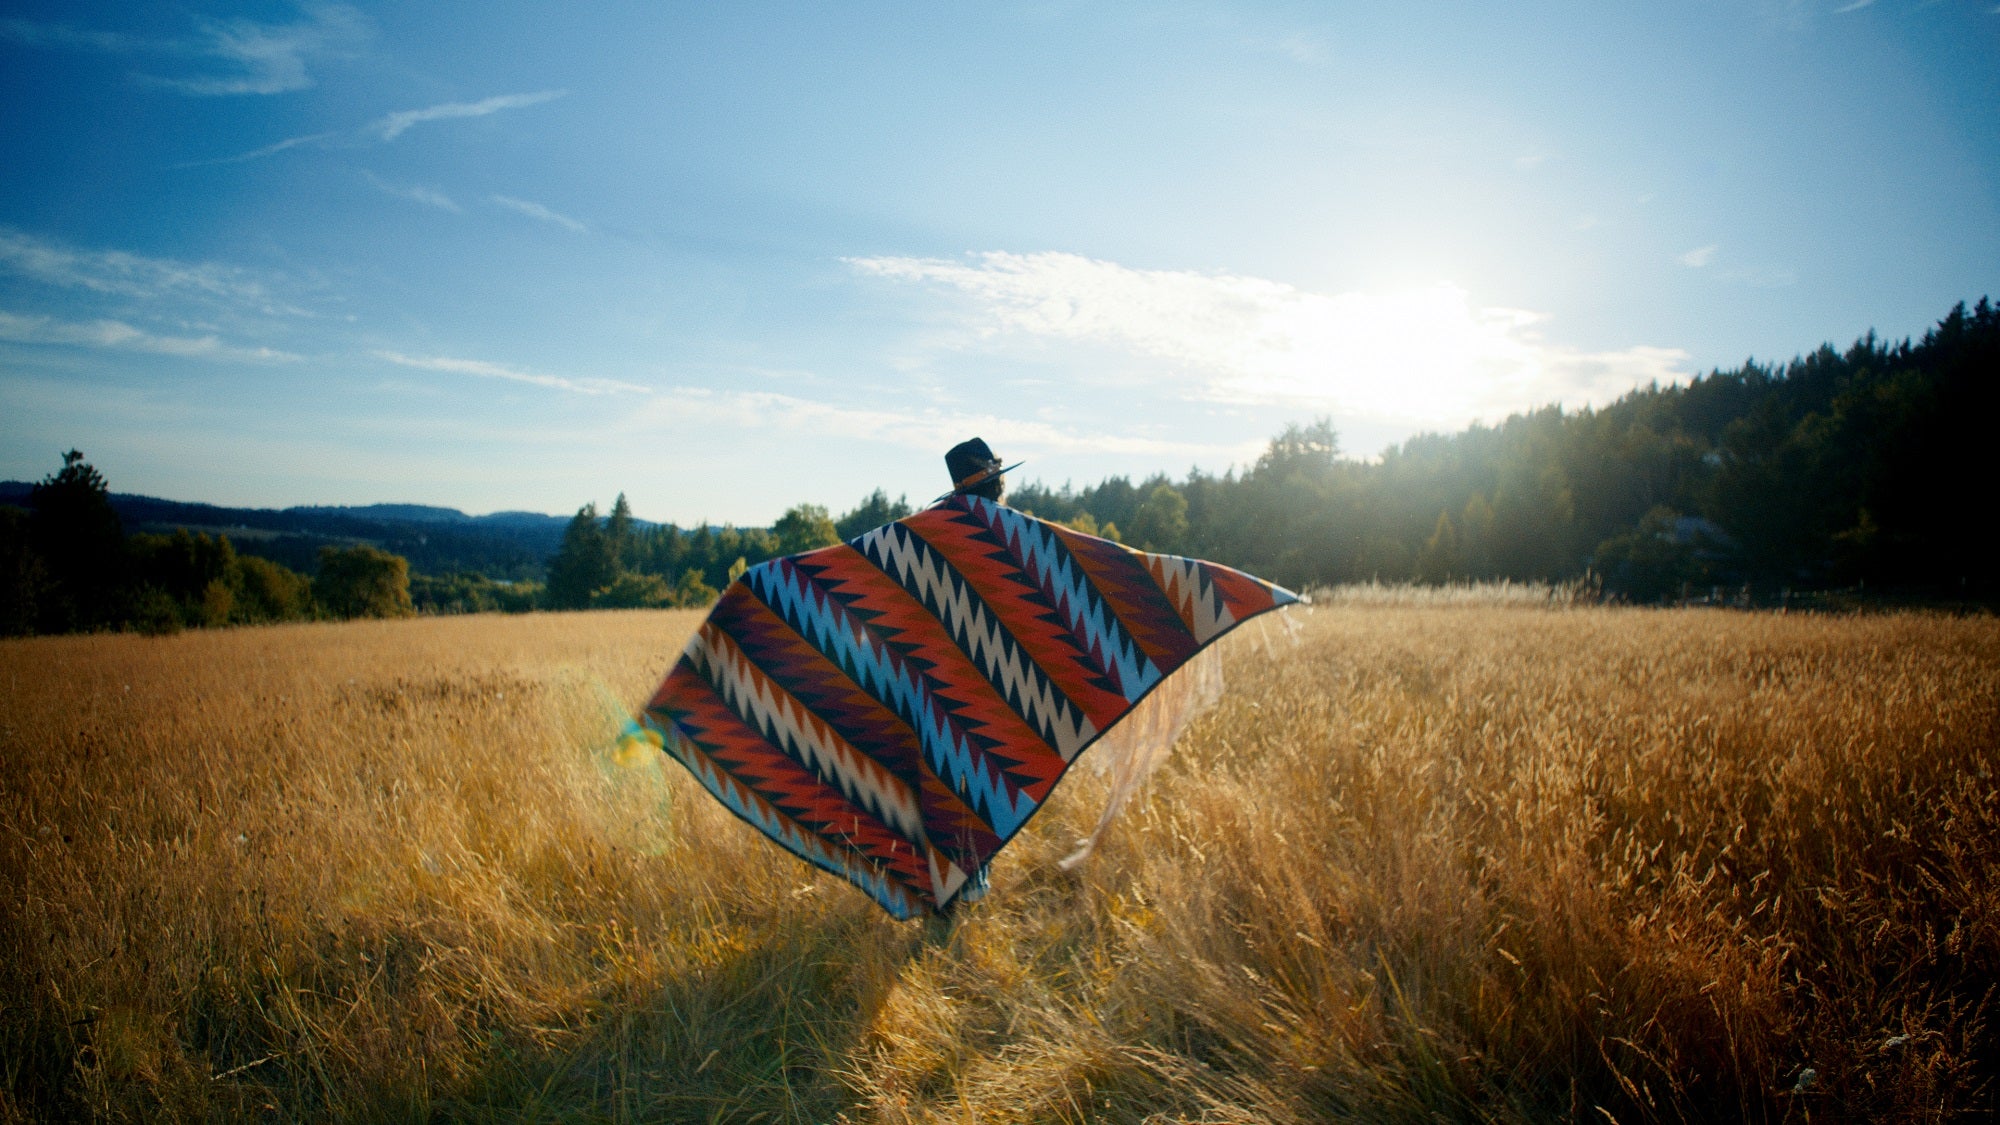 Native American made and designed by Ginew wool blanket held by model in field